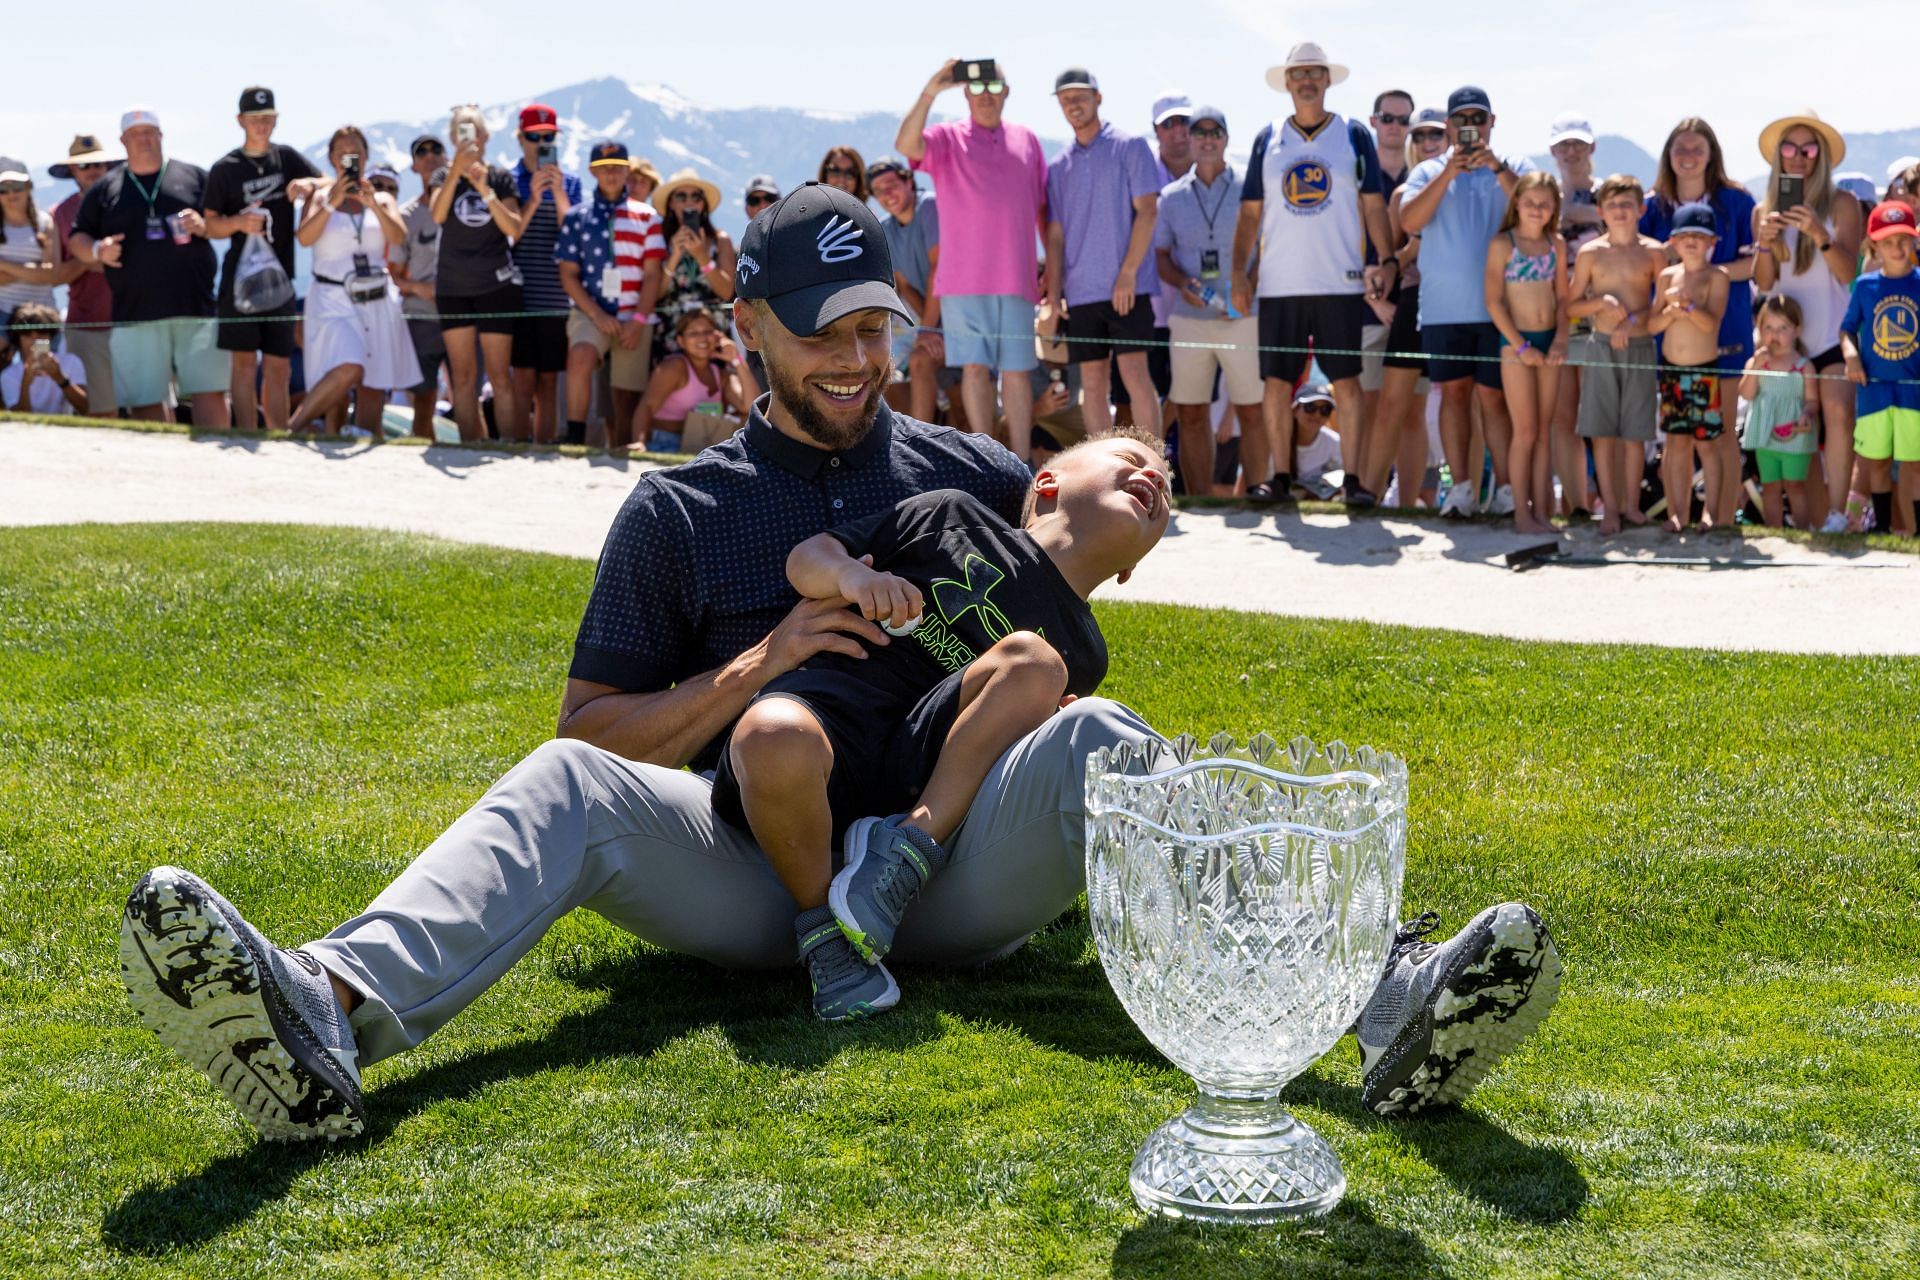 Steph Curry is thrilled after he sinks a clutch eagle to win the